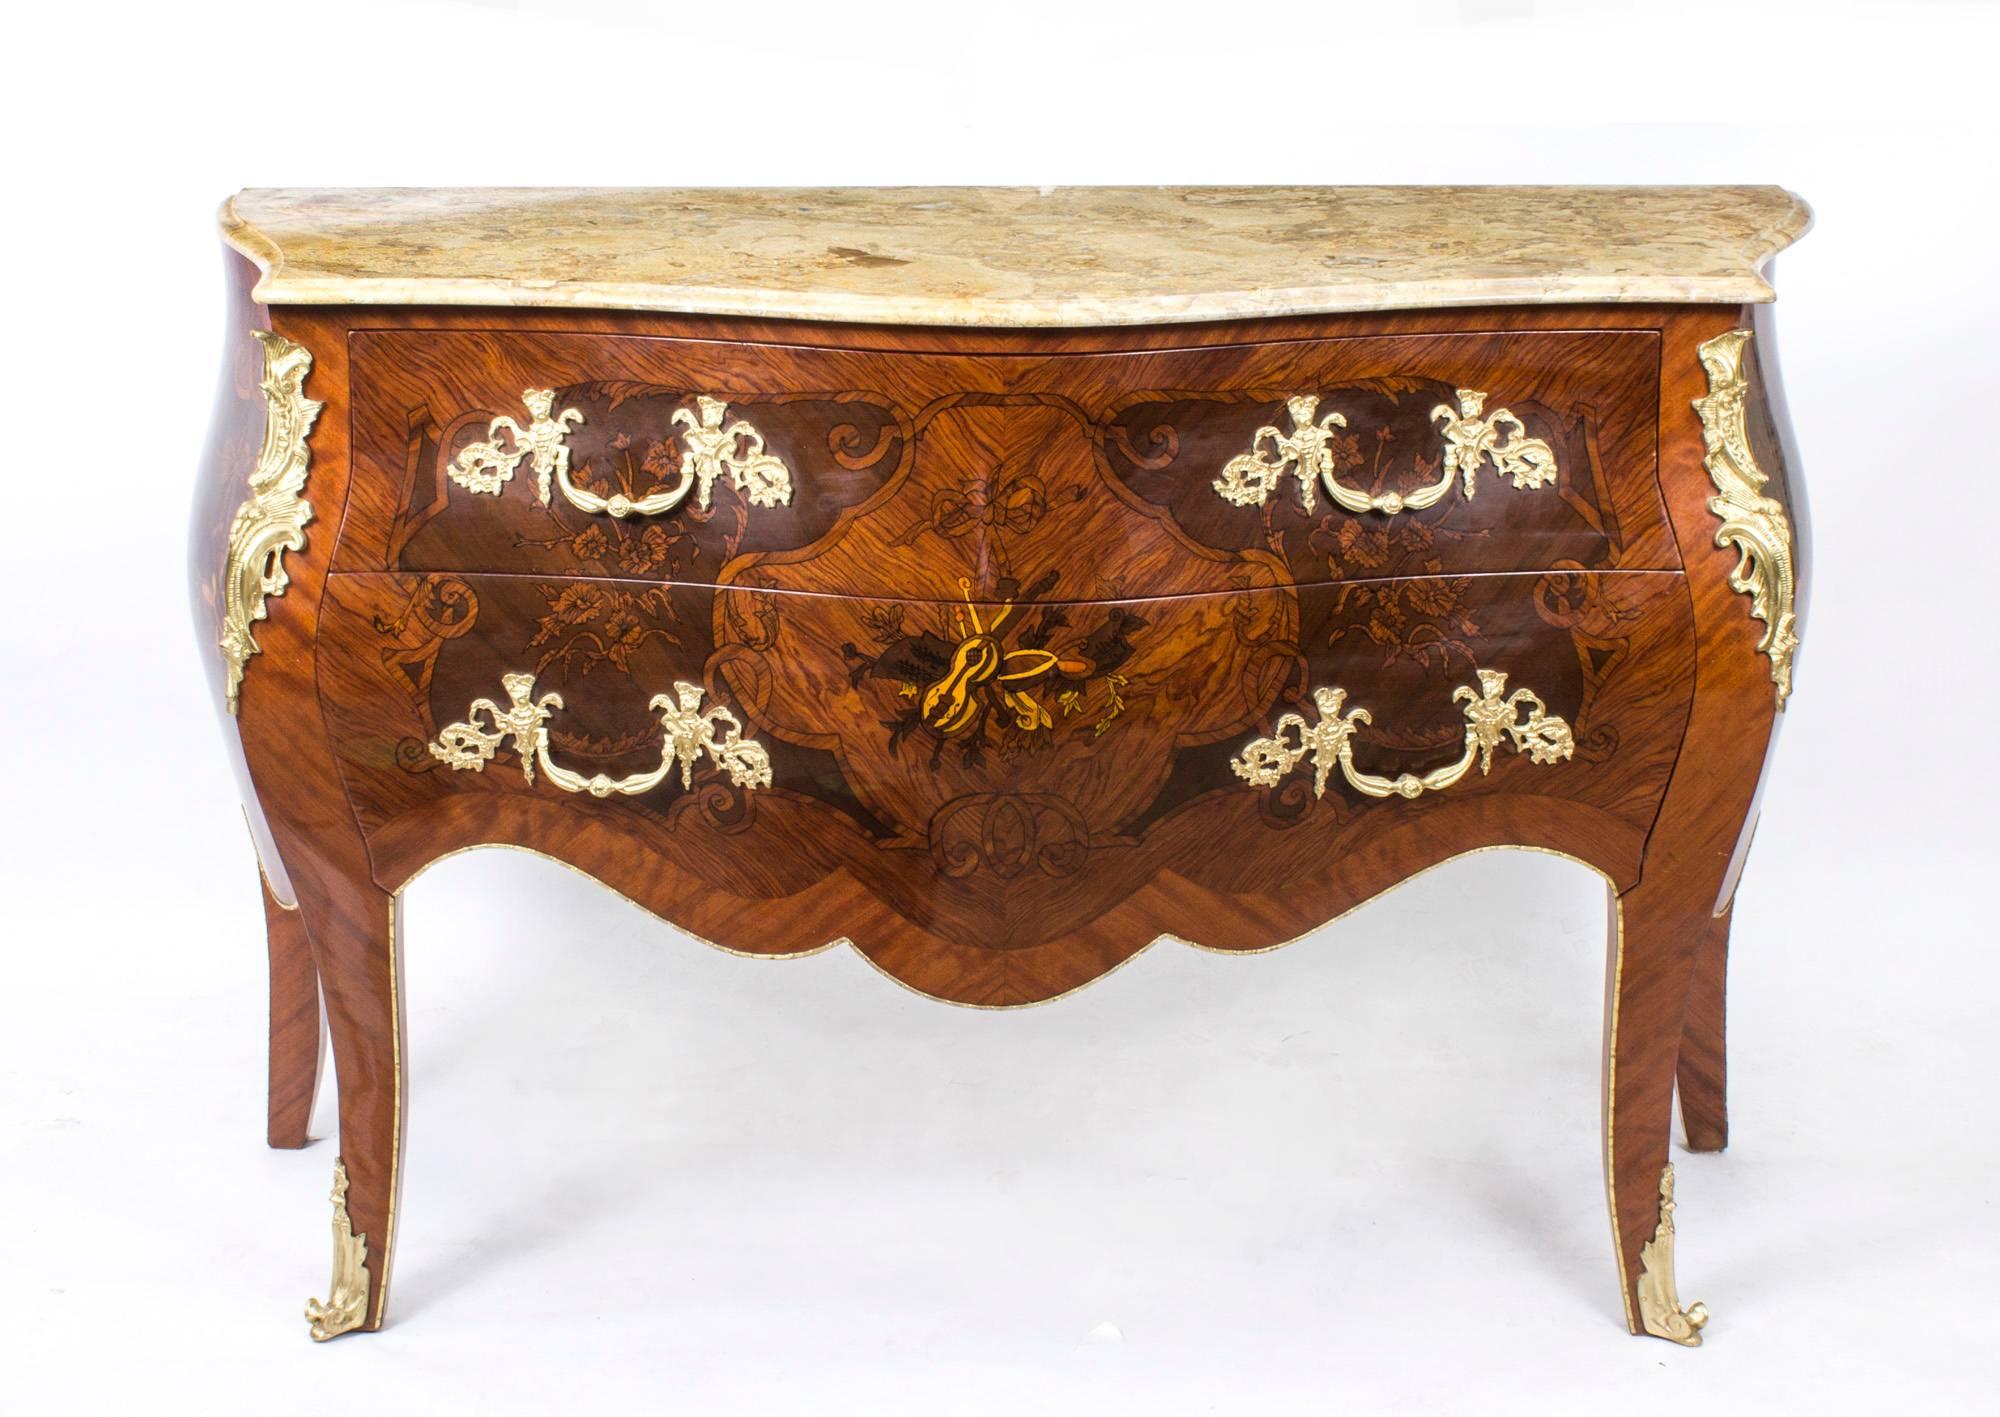 This is a beautiful Louis XV style marble topped bombe' marquetry commode, dating from the last quarter of the 20th century.

This highly decorative commode is made from rosewood and walnut and features exquisite floral marquetry decoration and